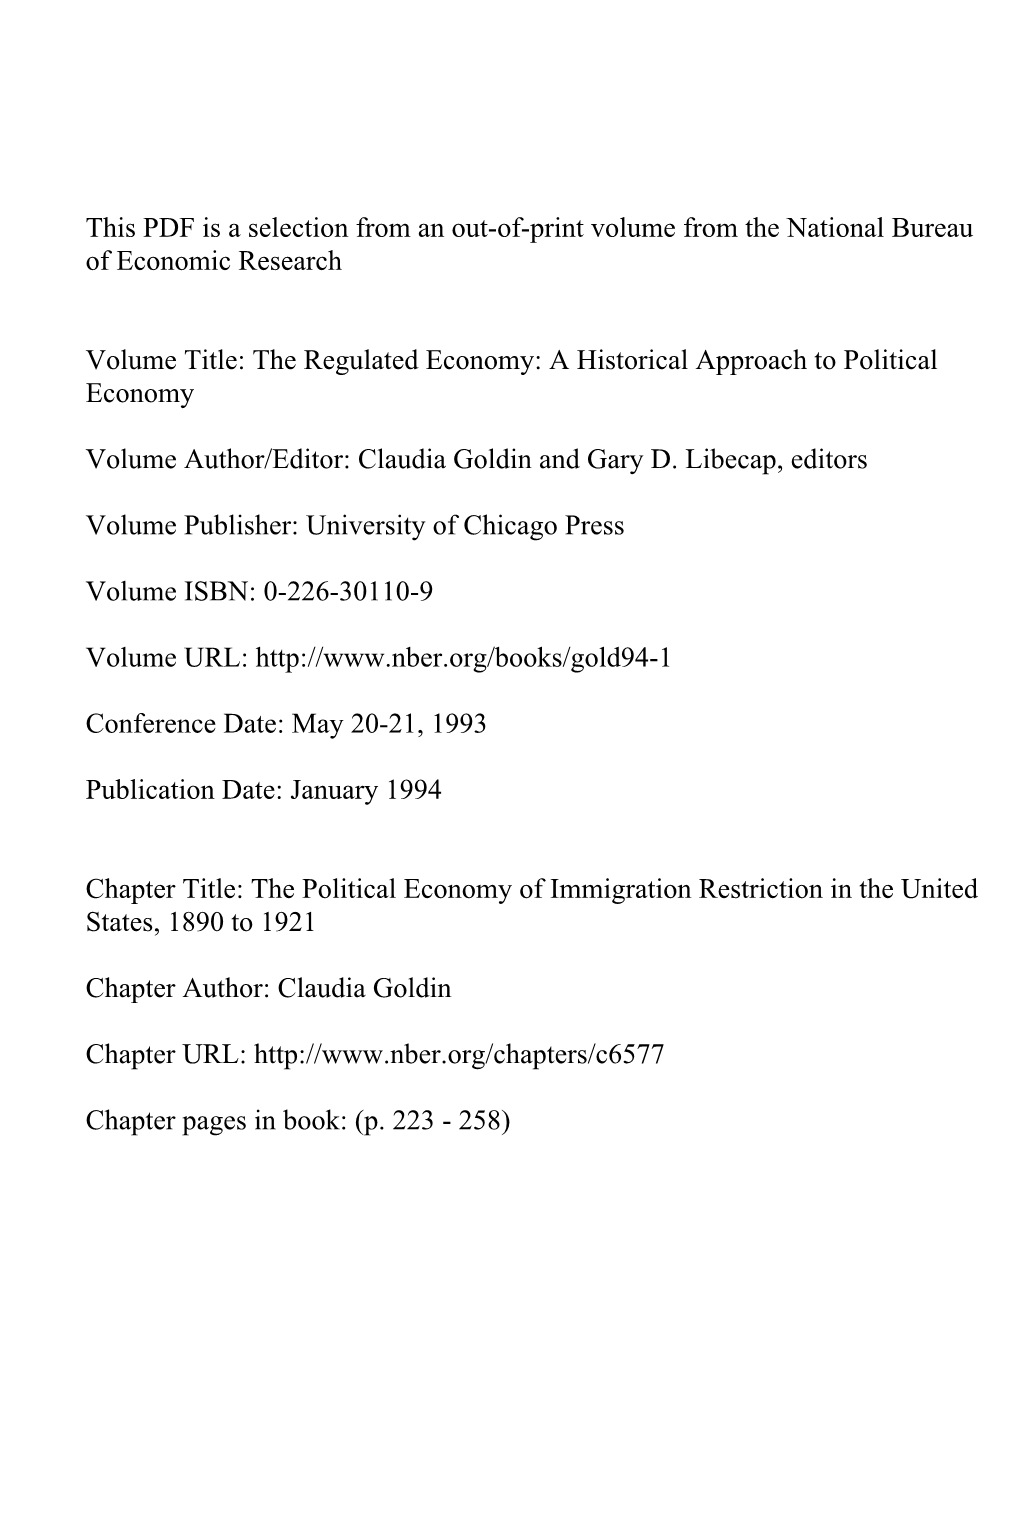 The Political Economy of Immigration Restriction in the United States, 1890 to 1921